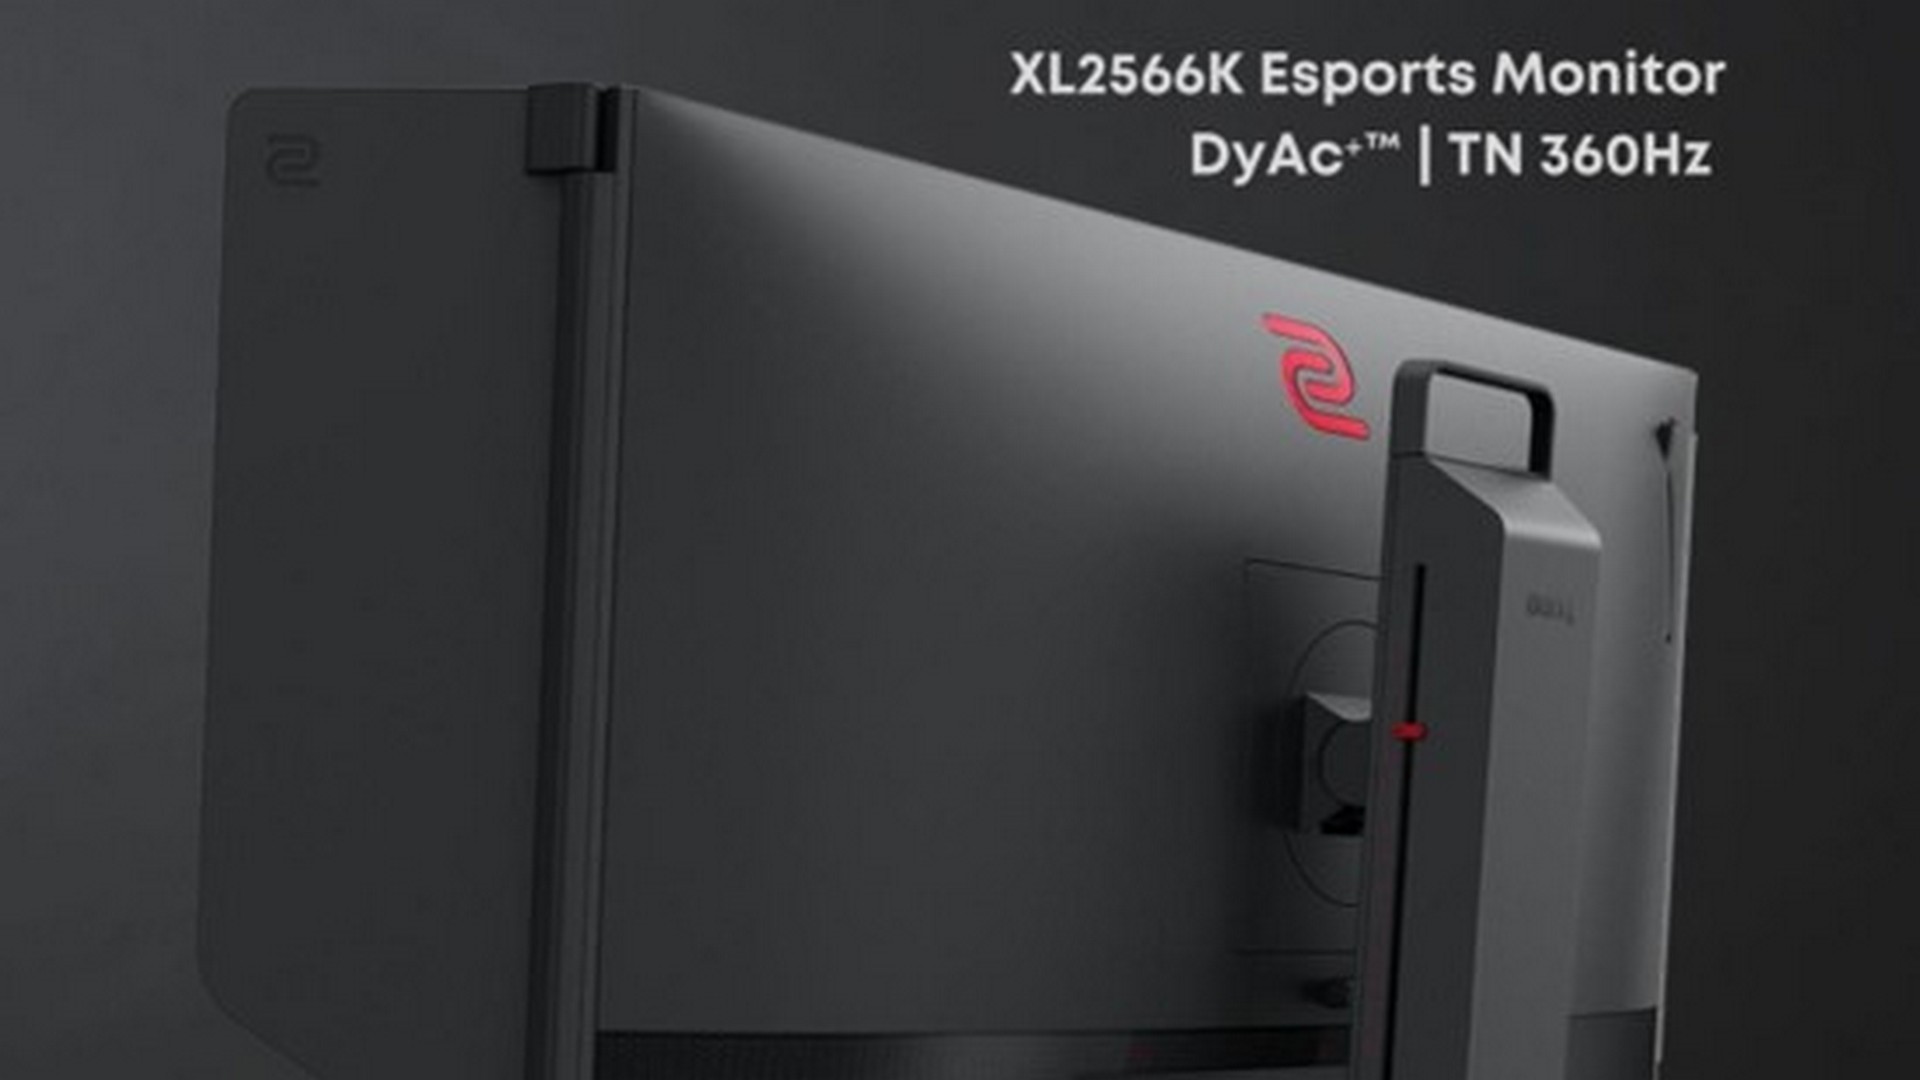 ZOWIE Announces Their First 360Hz TN Gaming Monitor XL2566K Providing The Best FPS In-Game Experience to Pro Players